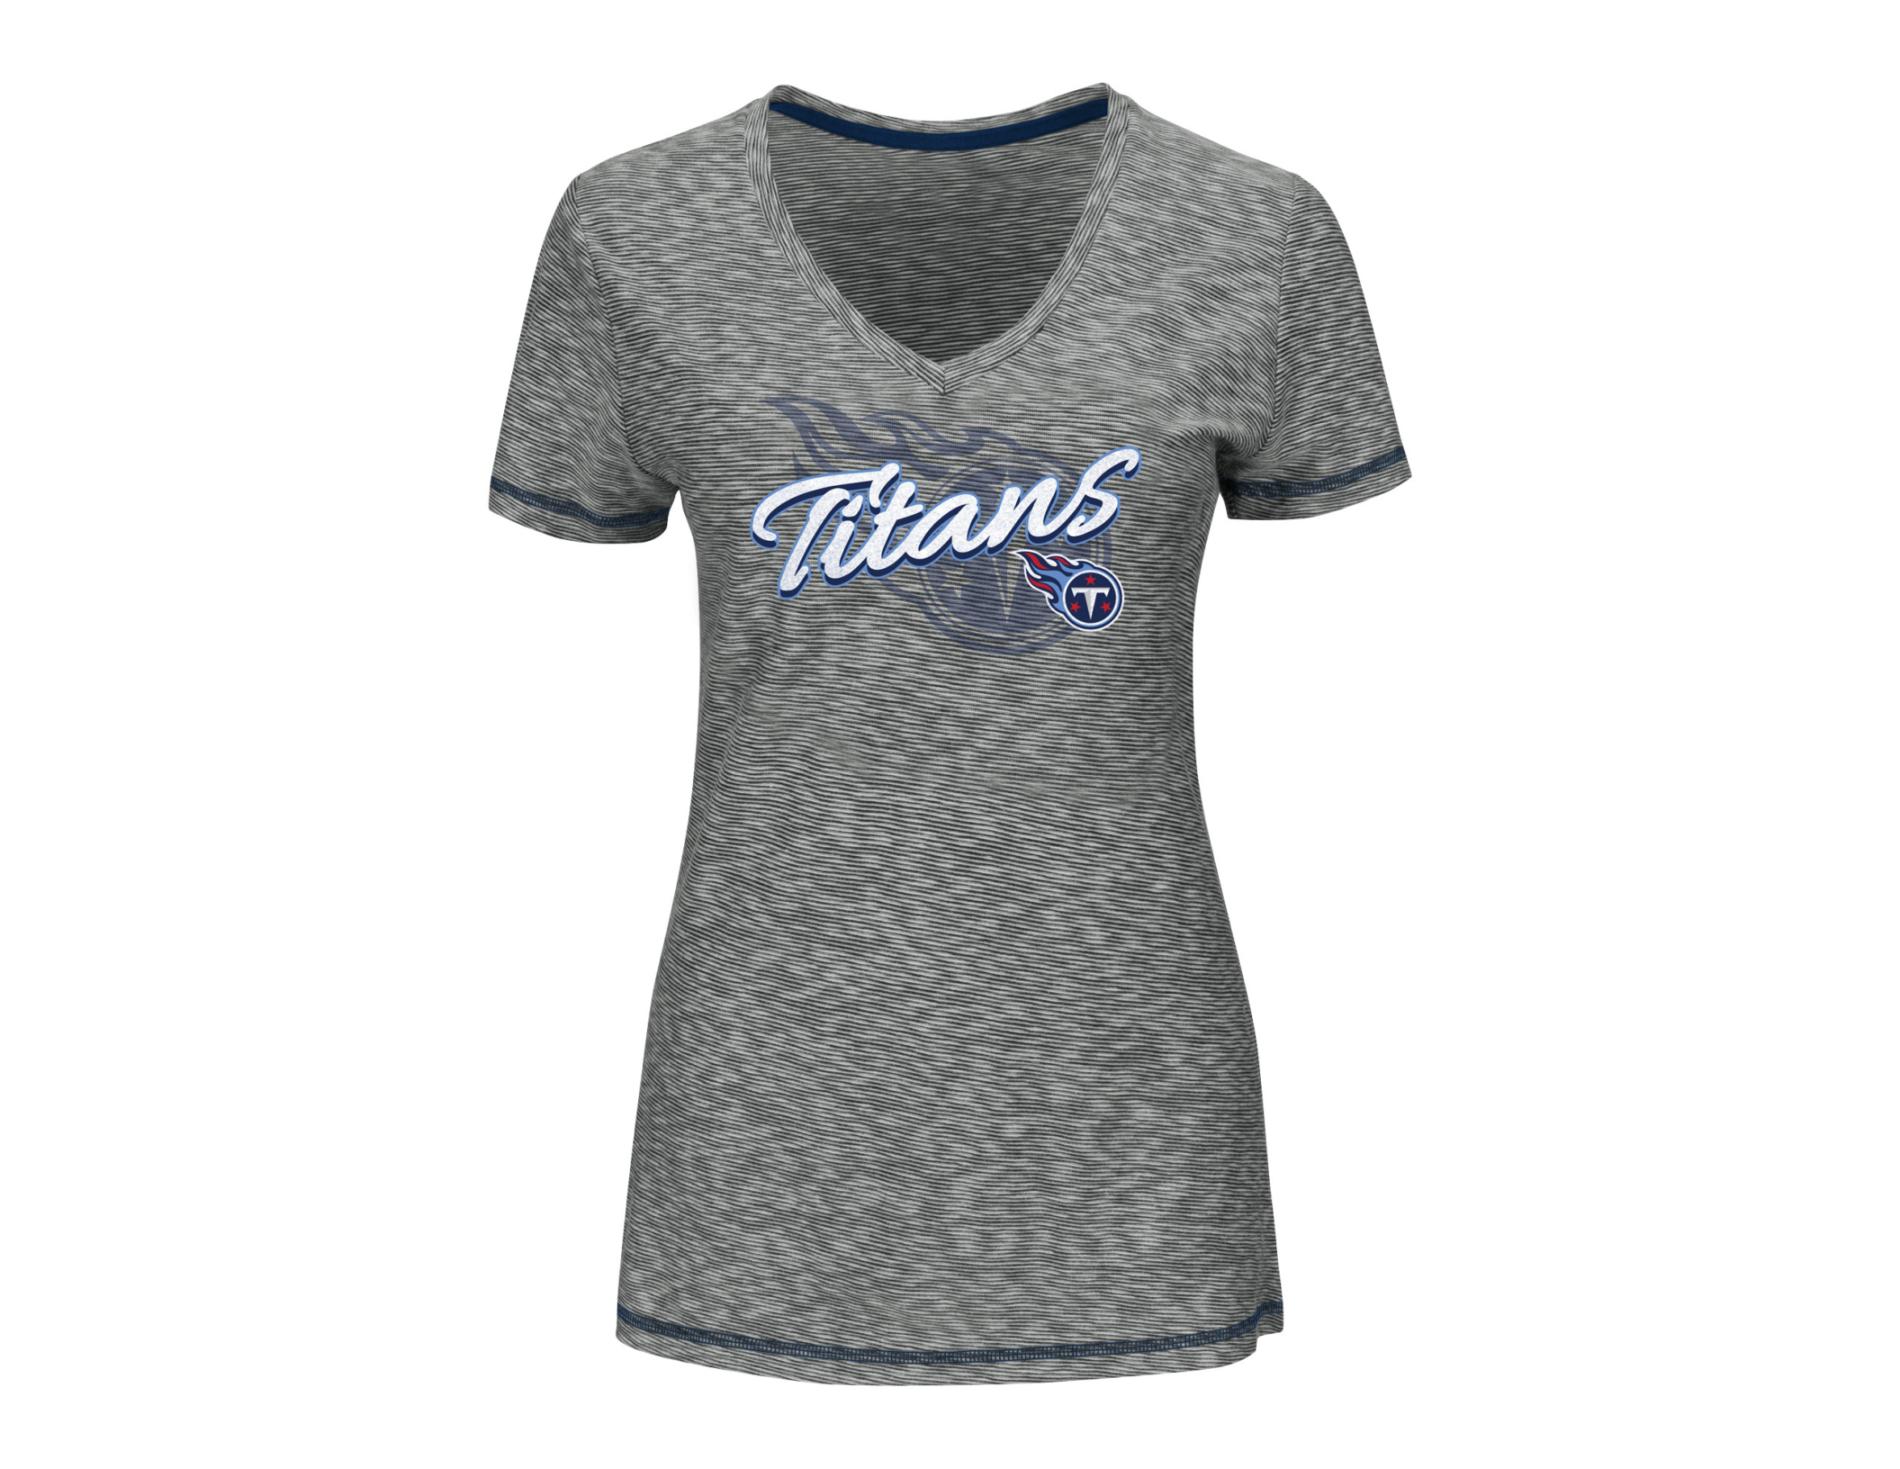 NFL Women's Ribbed Graphic T-Shirt - Tennessee Titans